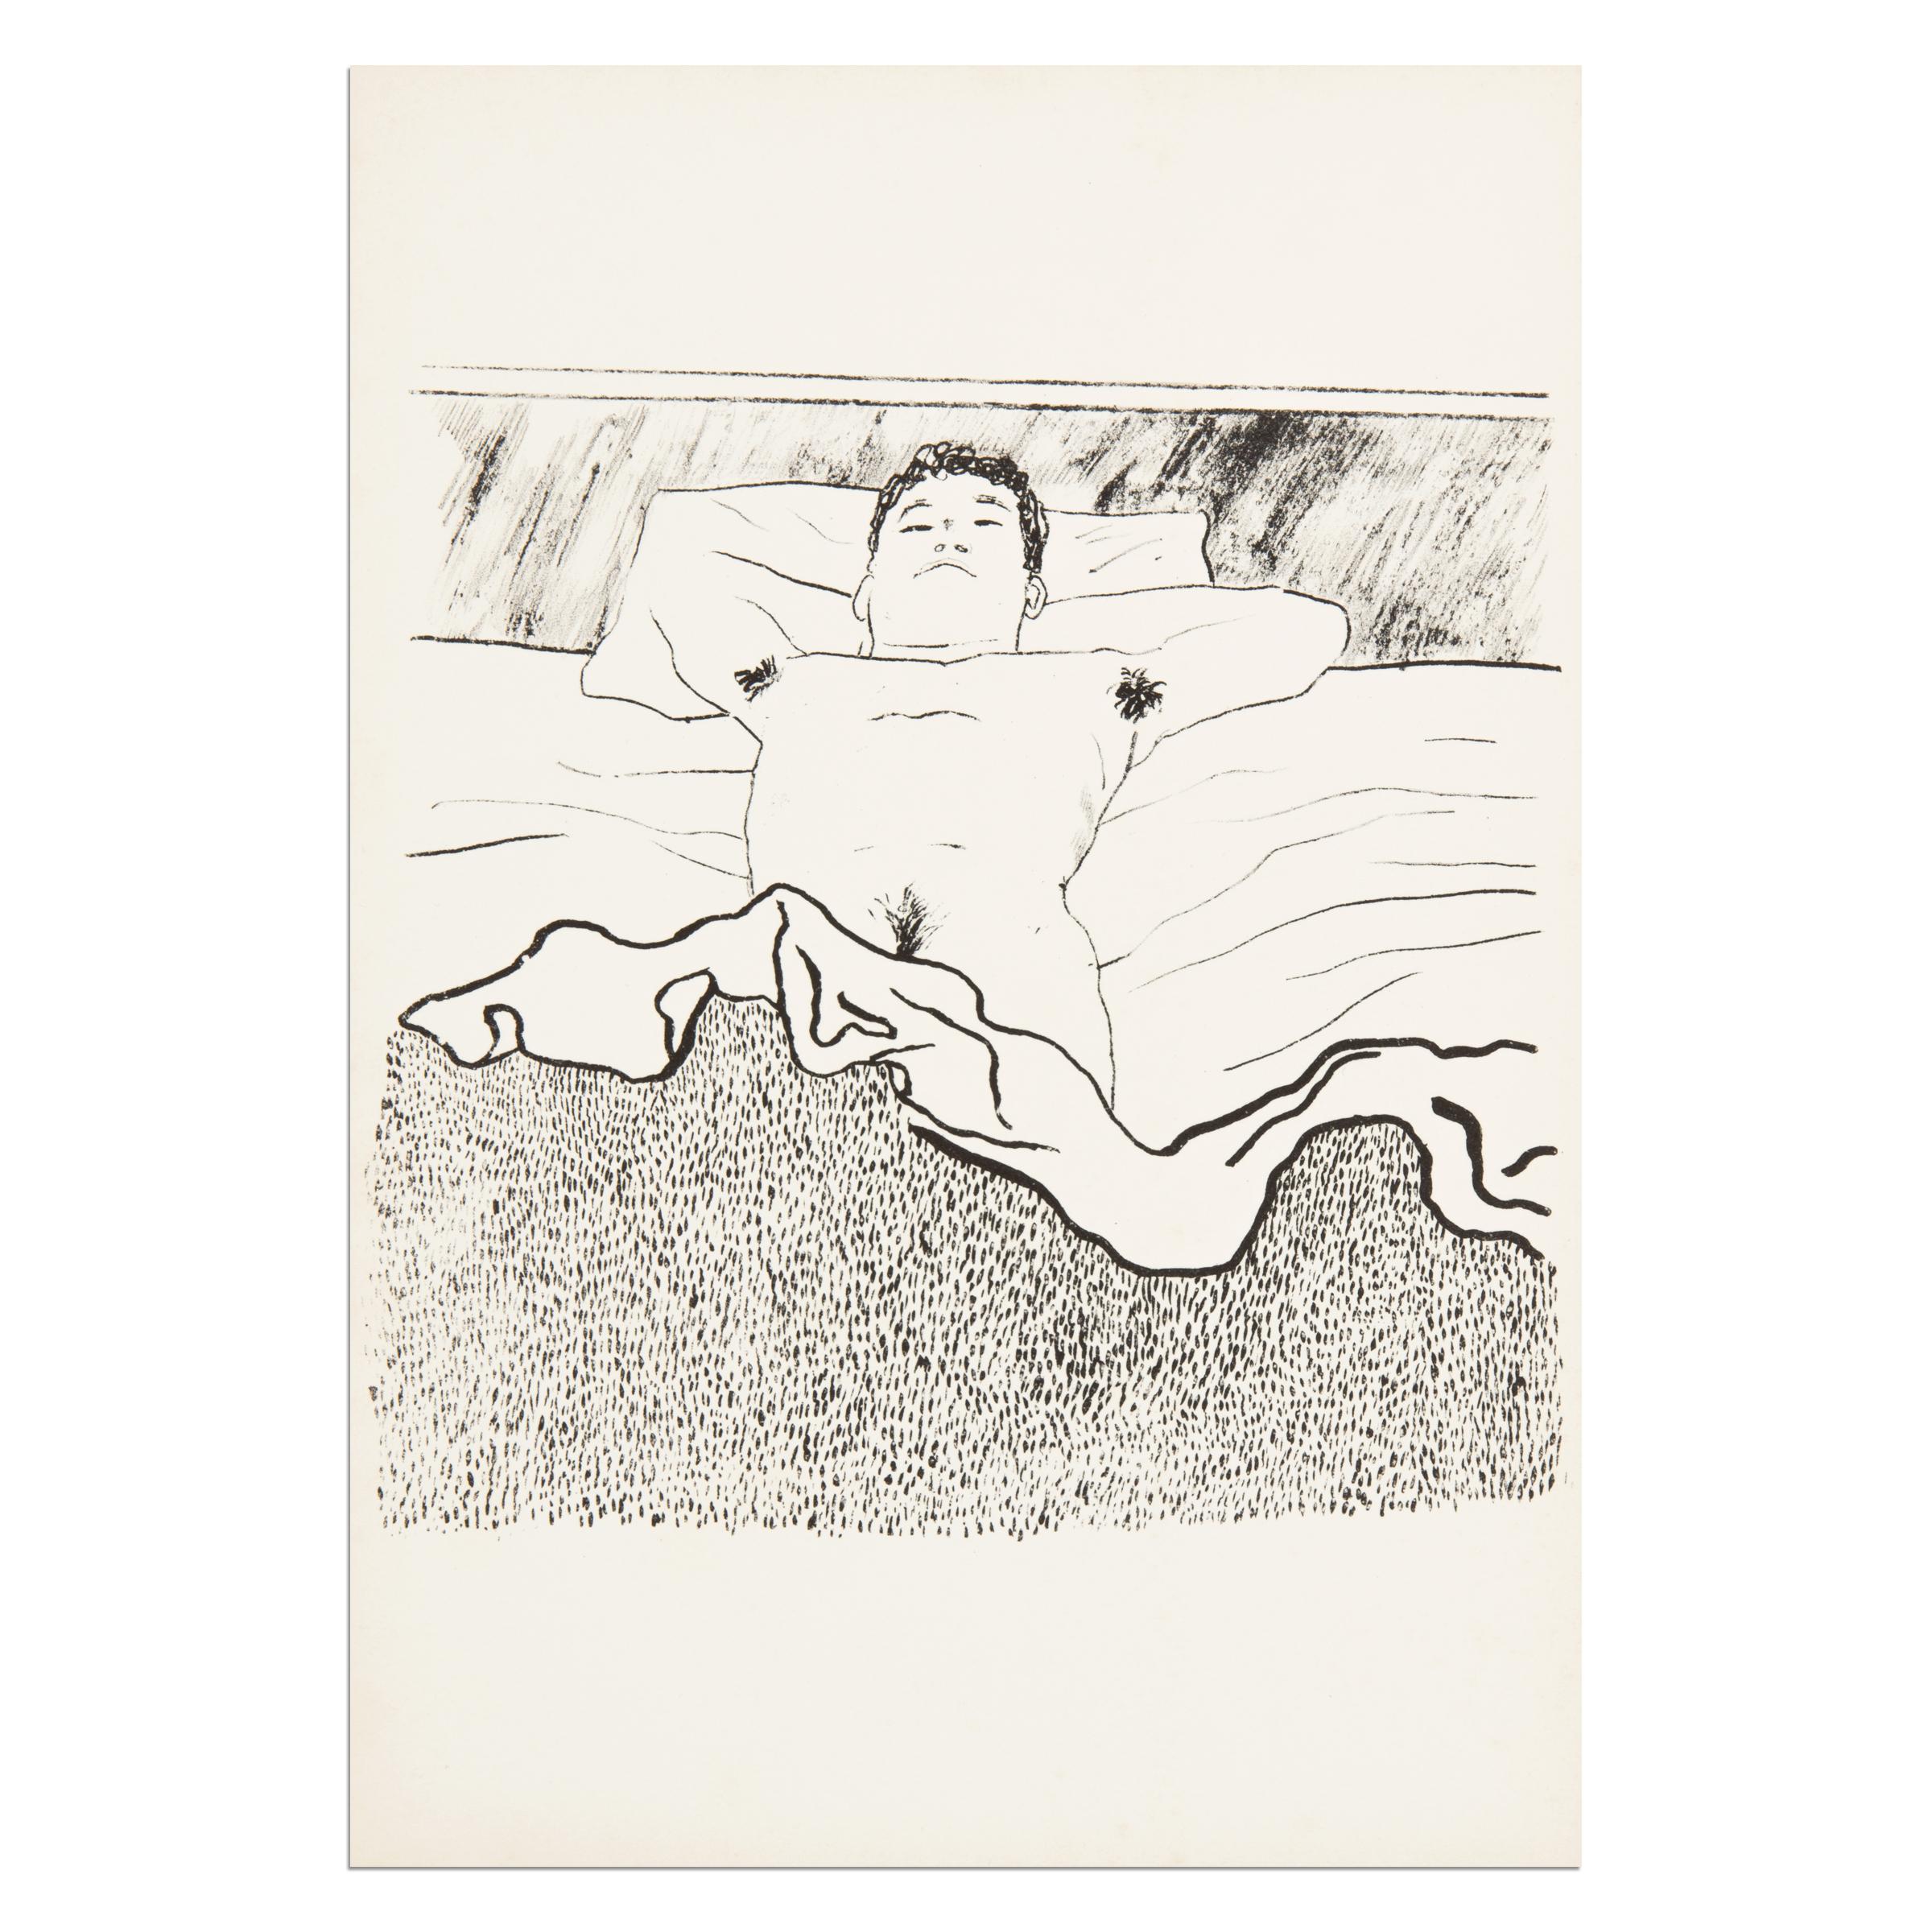 David Hockney
Untitled (from Geh durch den Spiegel), 1966
Medium: Lithograph on paper
Dimensions: 14 7/10 × 10 1/10 in (37.3 × 25.6 cm)
Edition of 250: Not signed, not numbered
Condition: Very good (never framed)